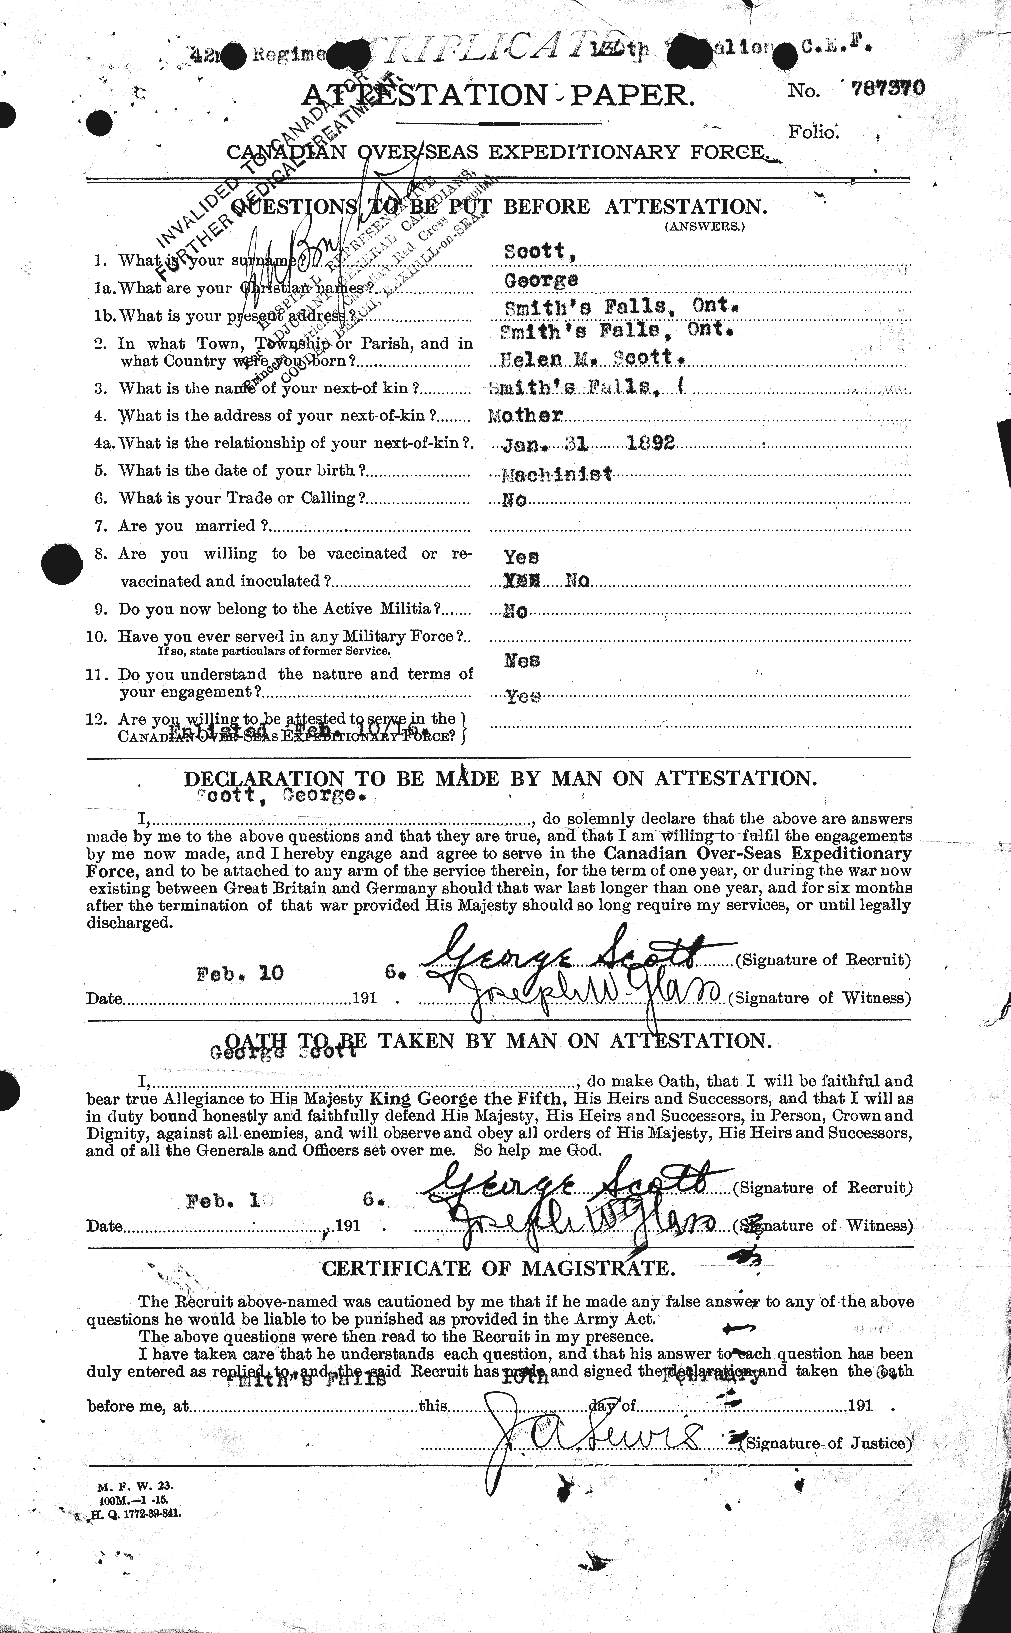 Personnel Records of the First World War - CEF 083584a